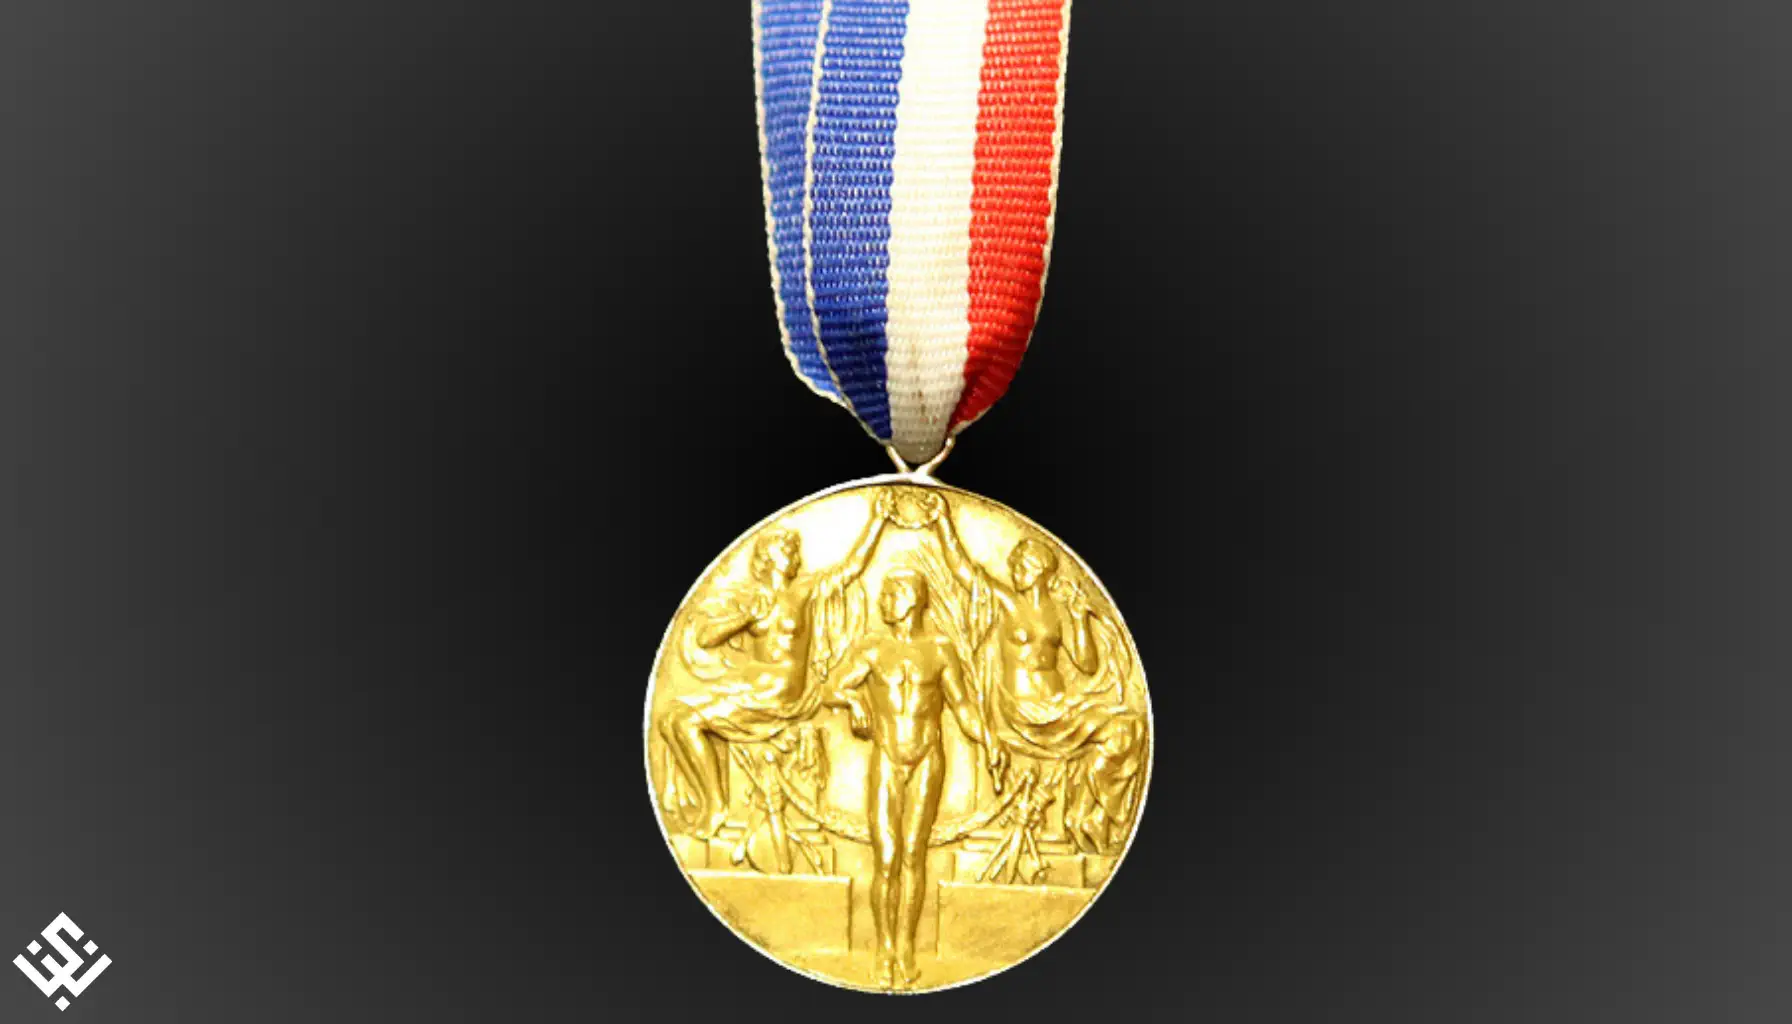 Olympic gold medals were made entirely of gold